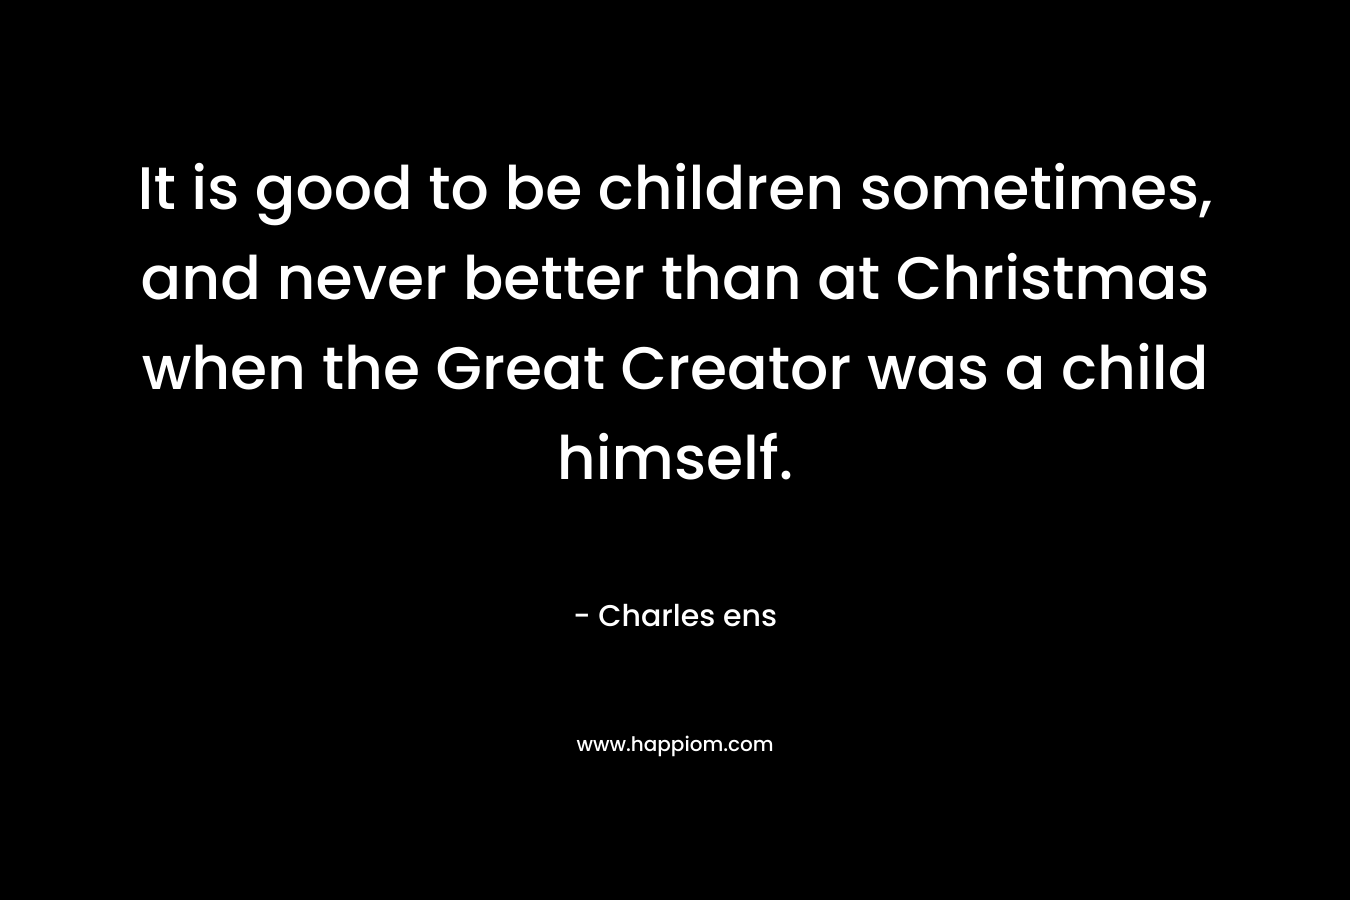 It is good to be children sometimes, and never better than at Christmas when the Great Creator was a child himself.